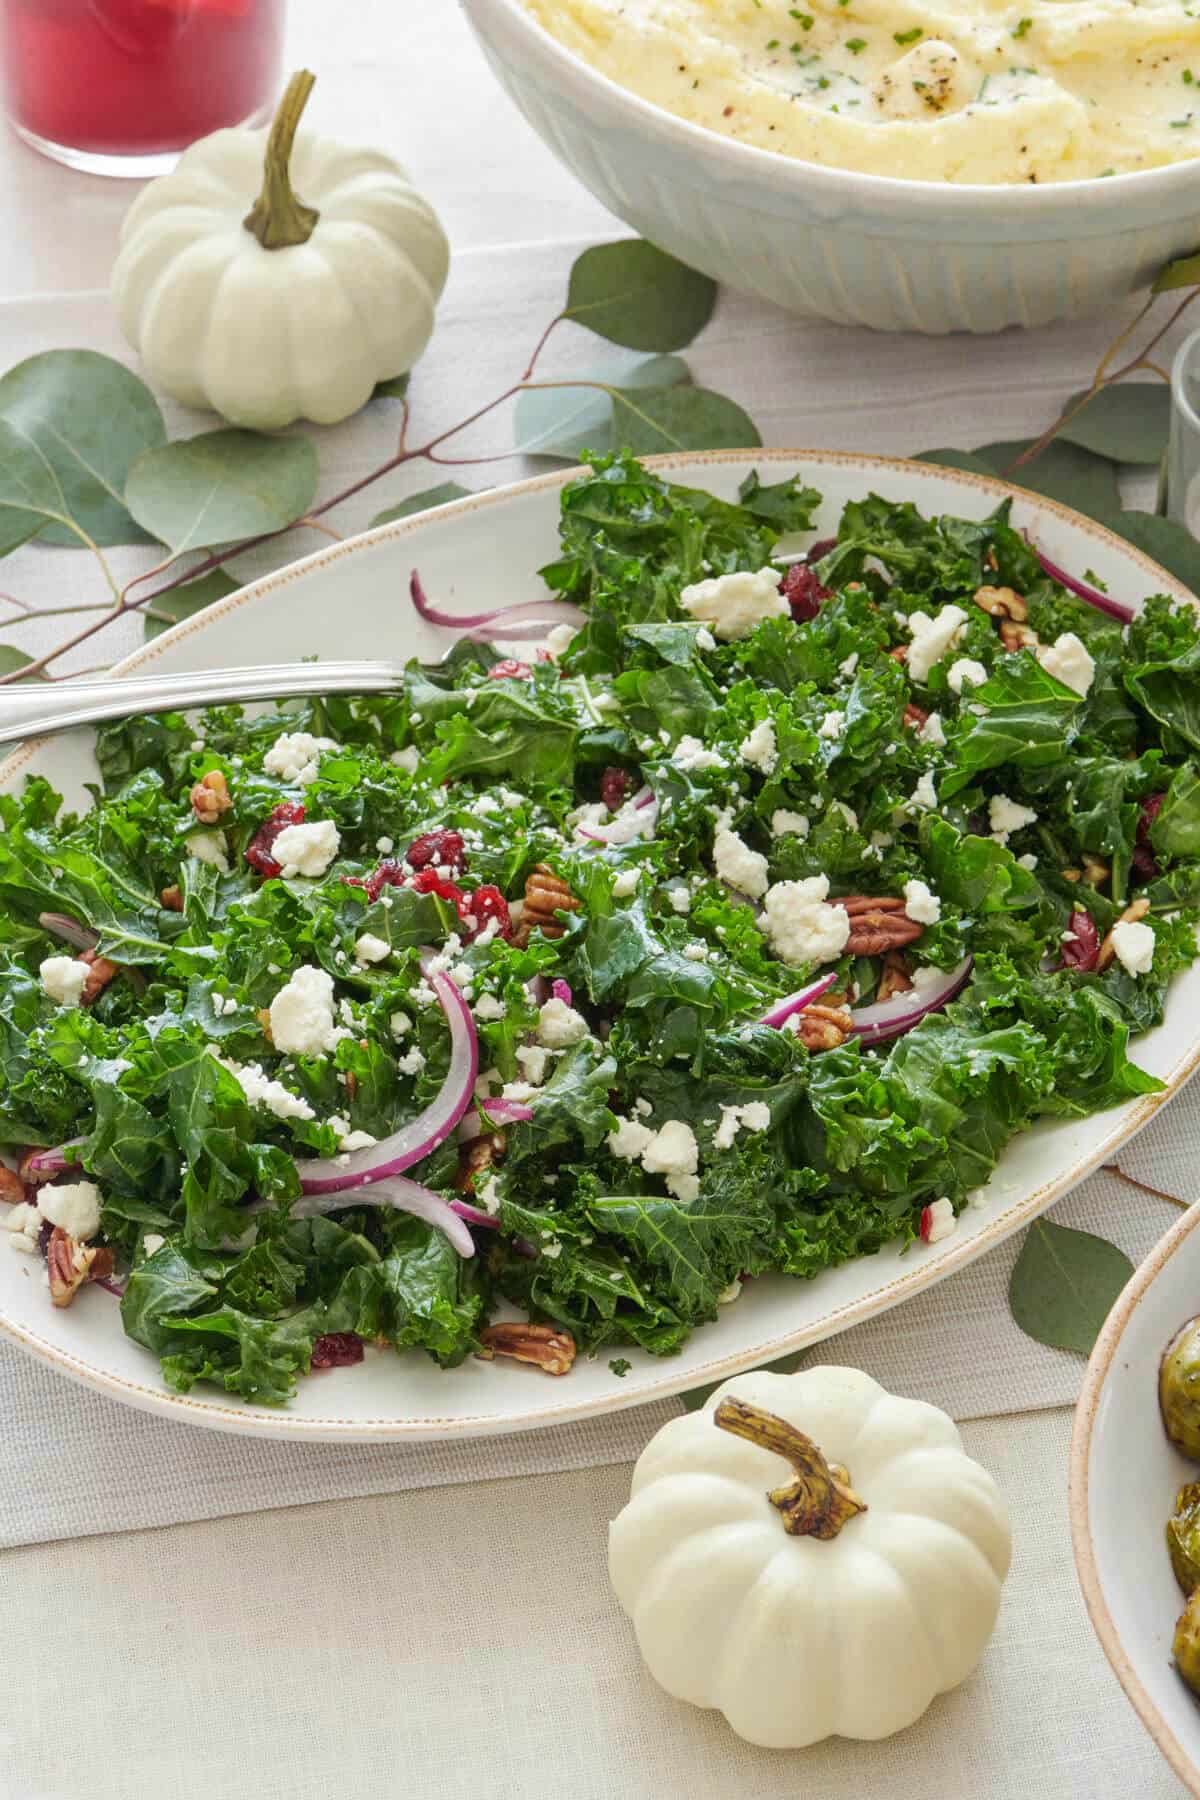 Massaged kale salad on a platter with a serving being lifted up.